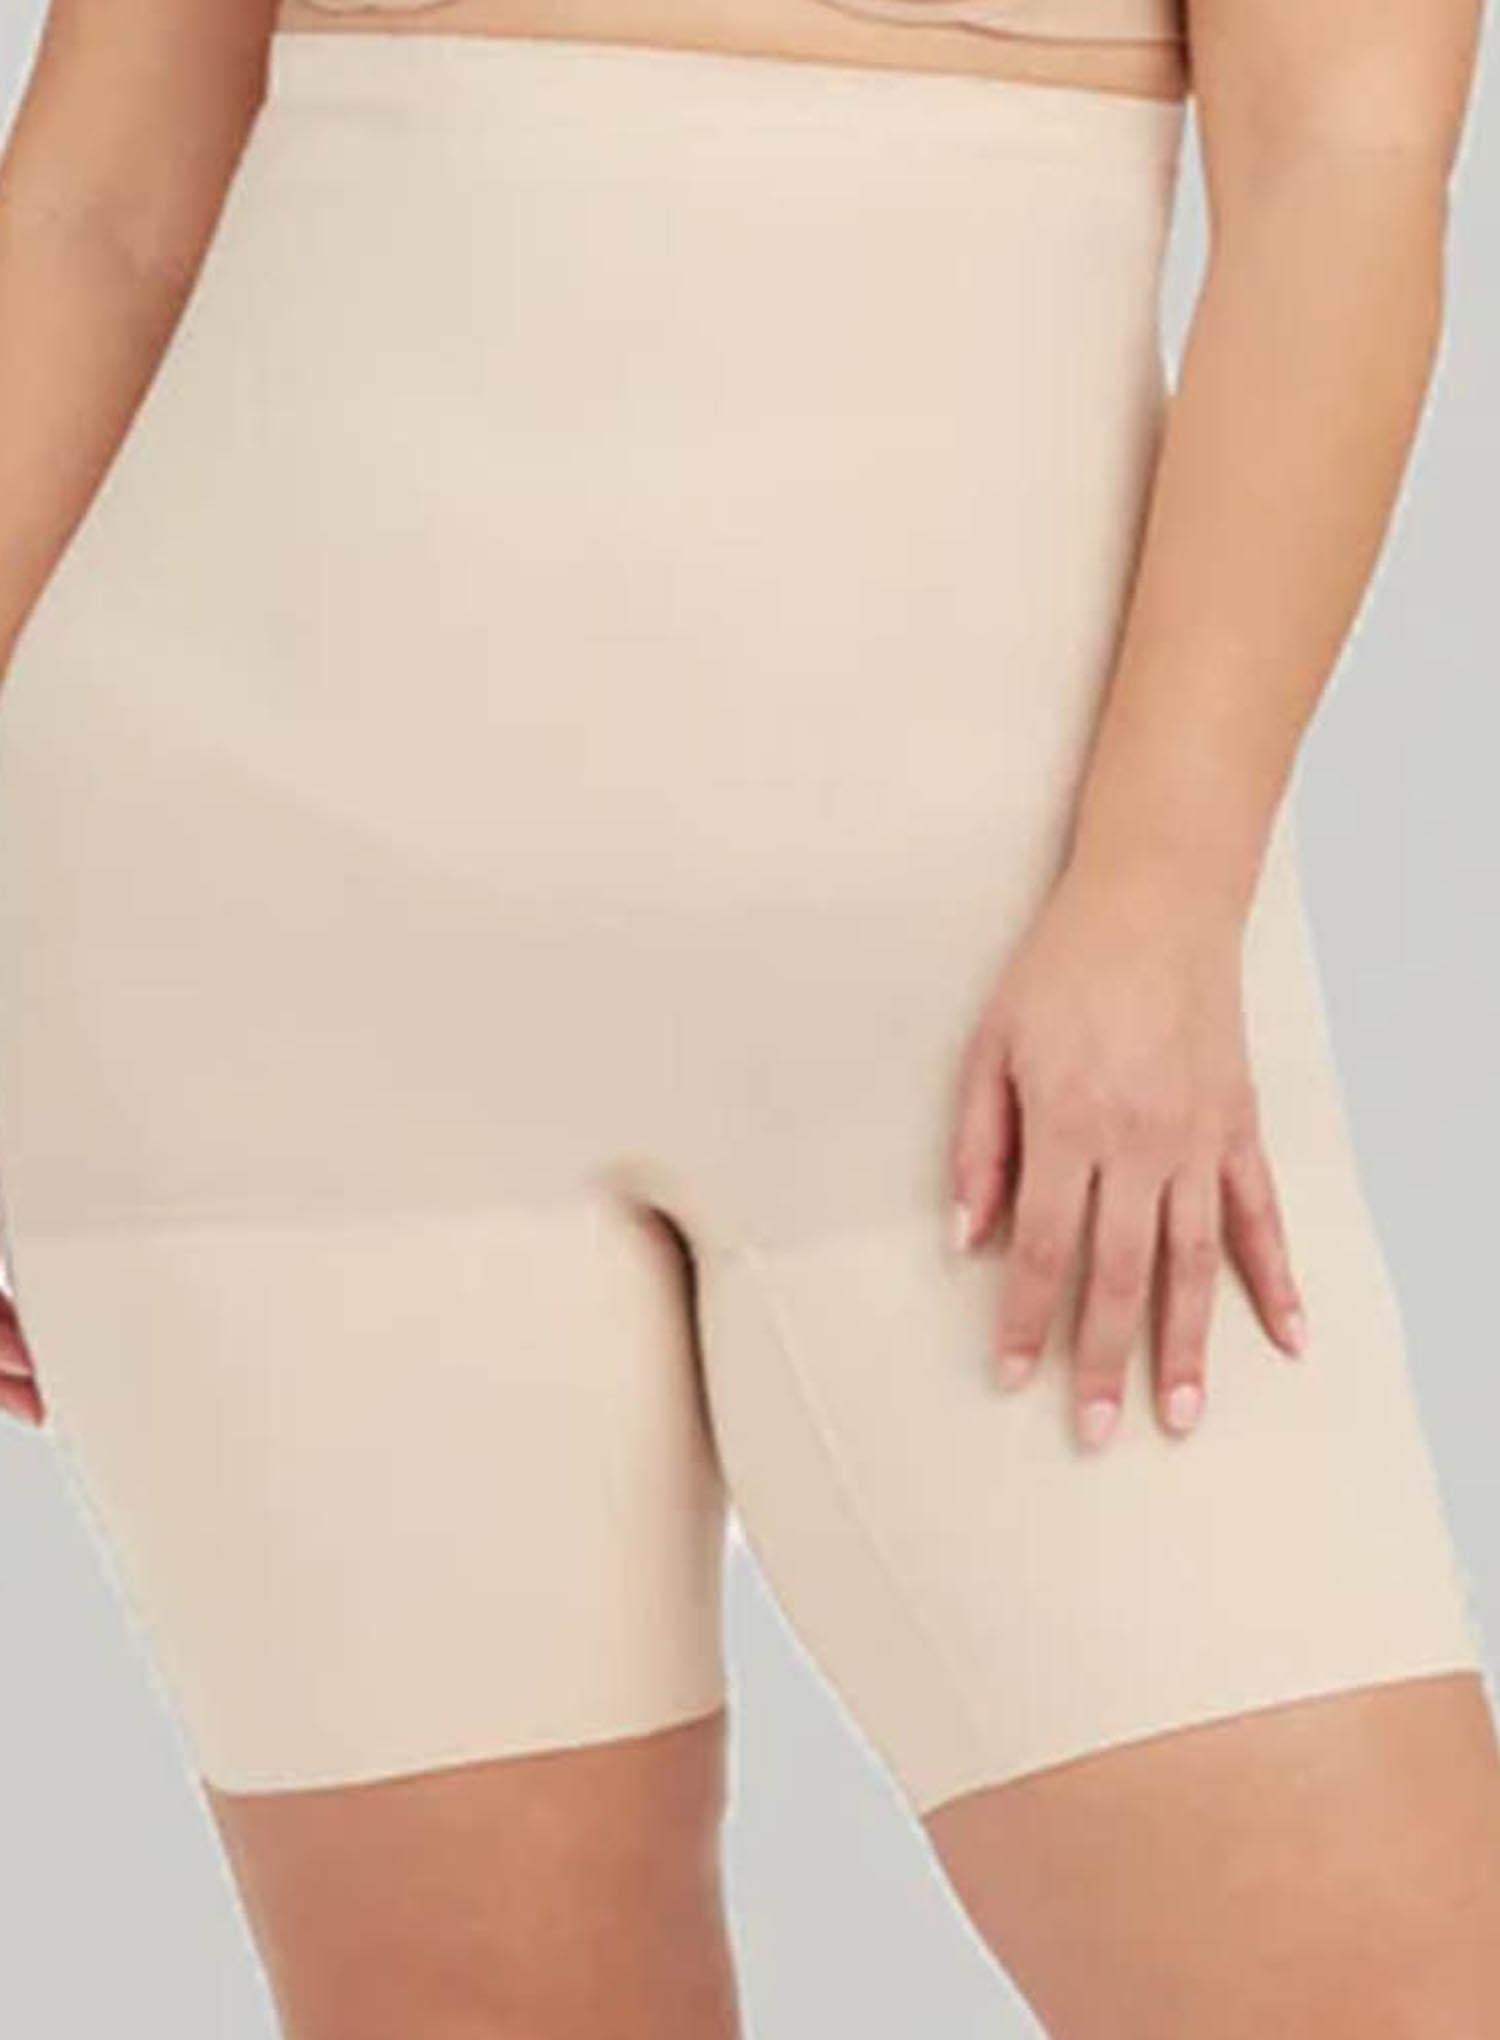 Spanx - Higher Power Short In 2 Colours, Nude & Black